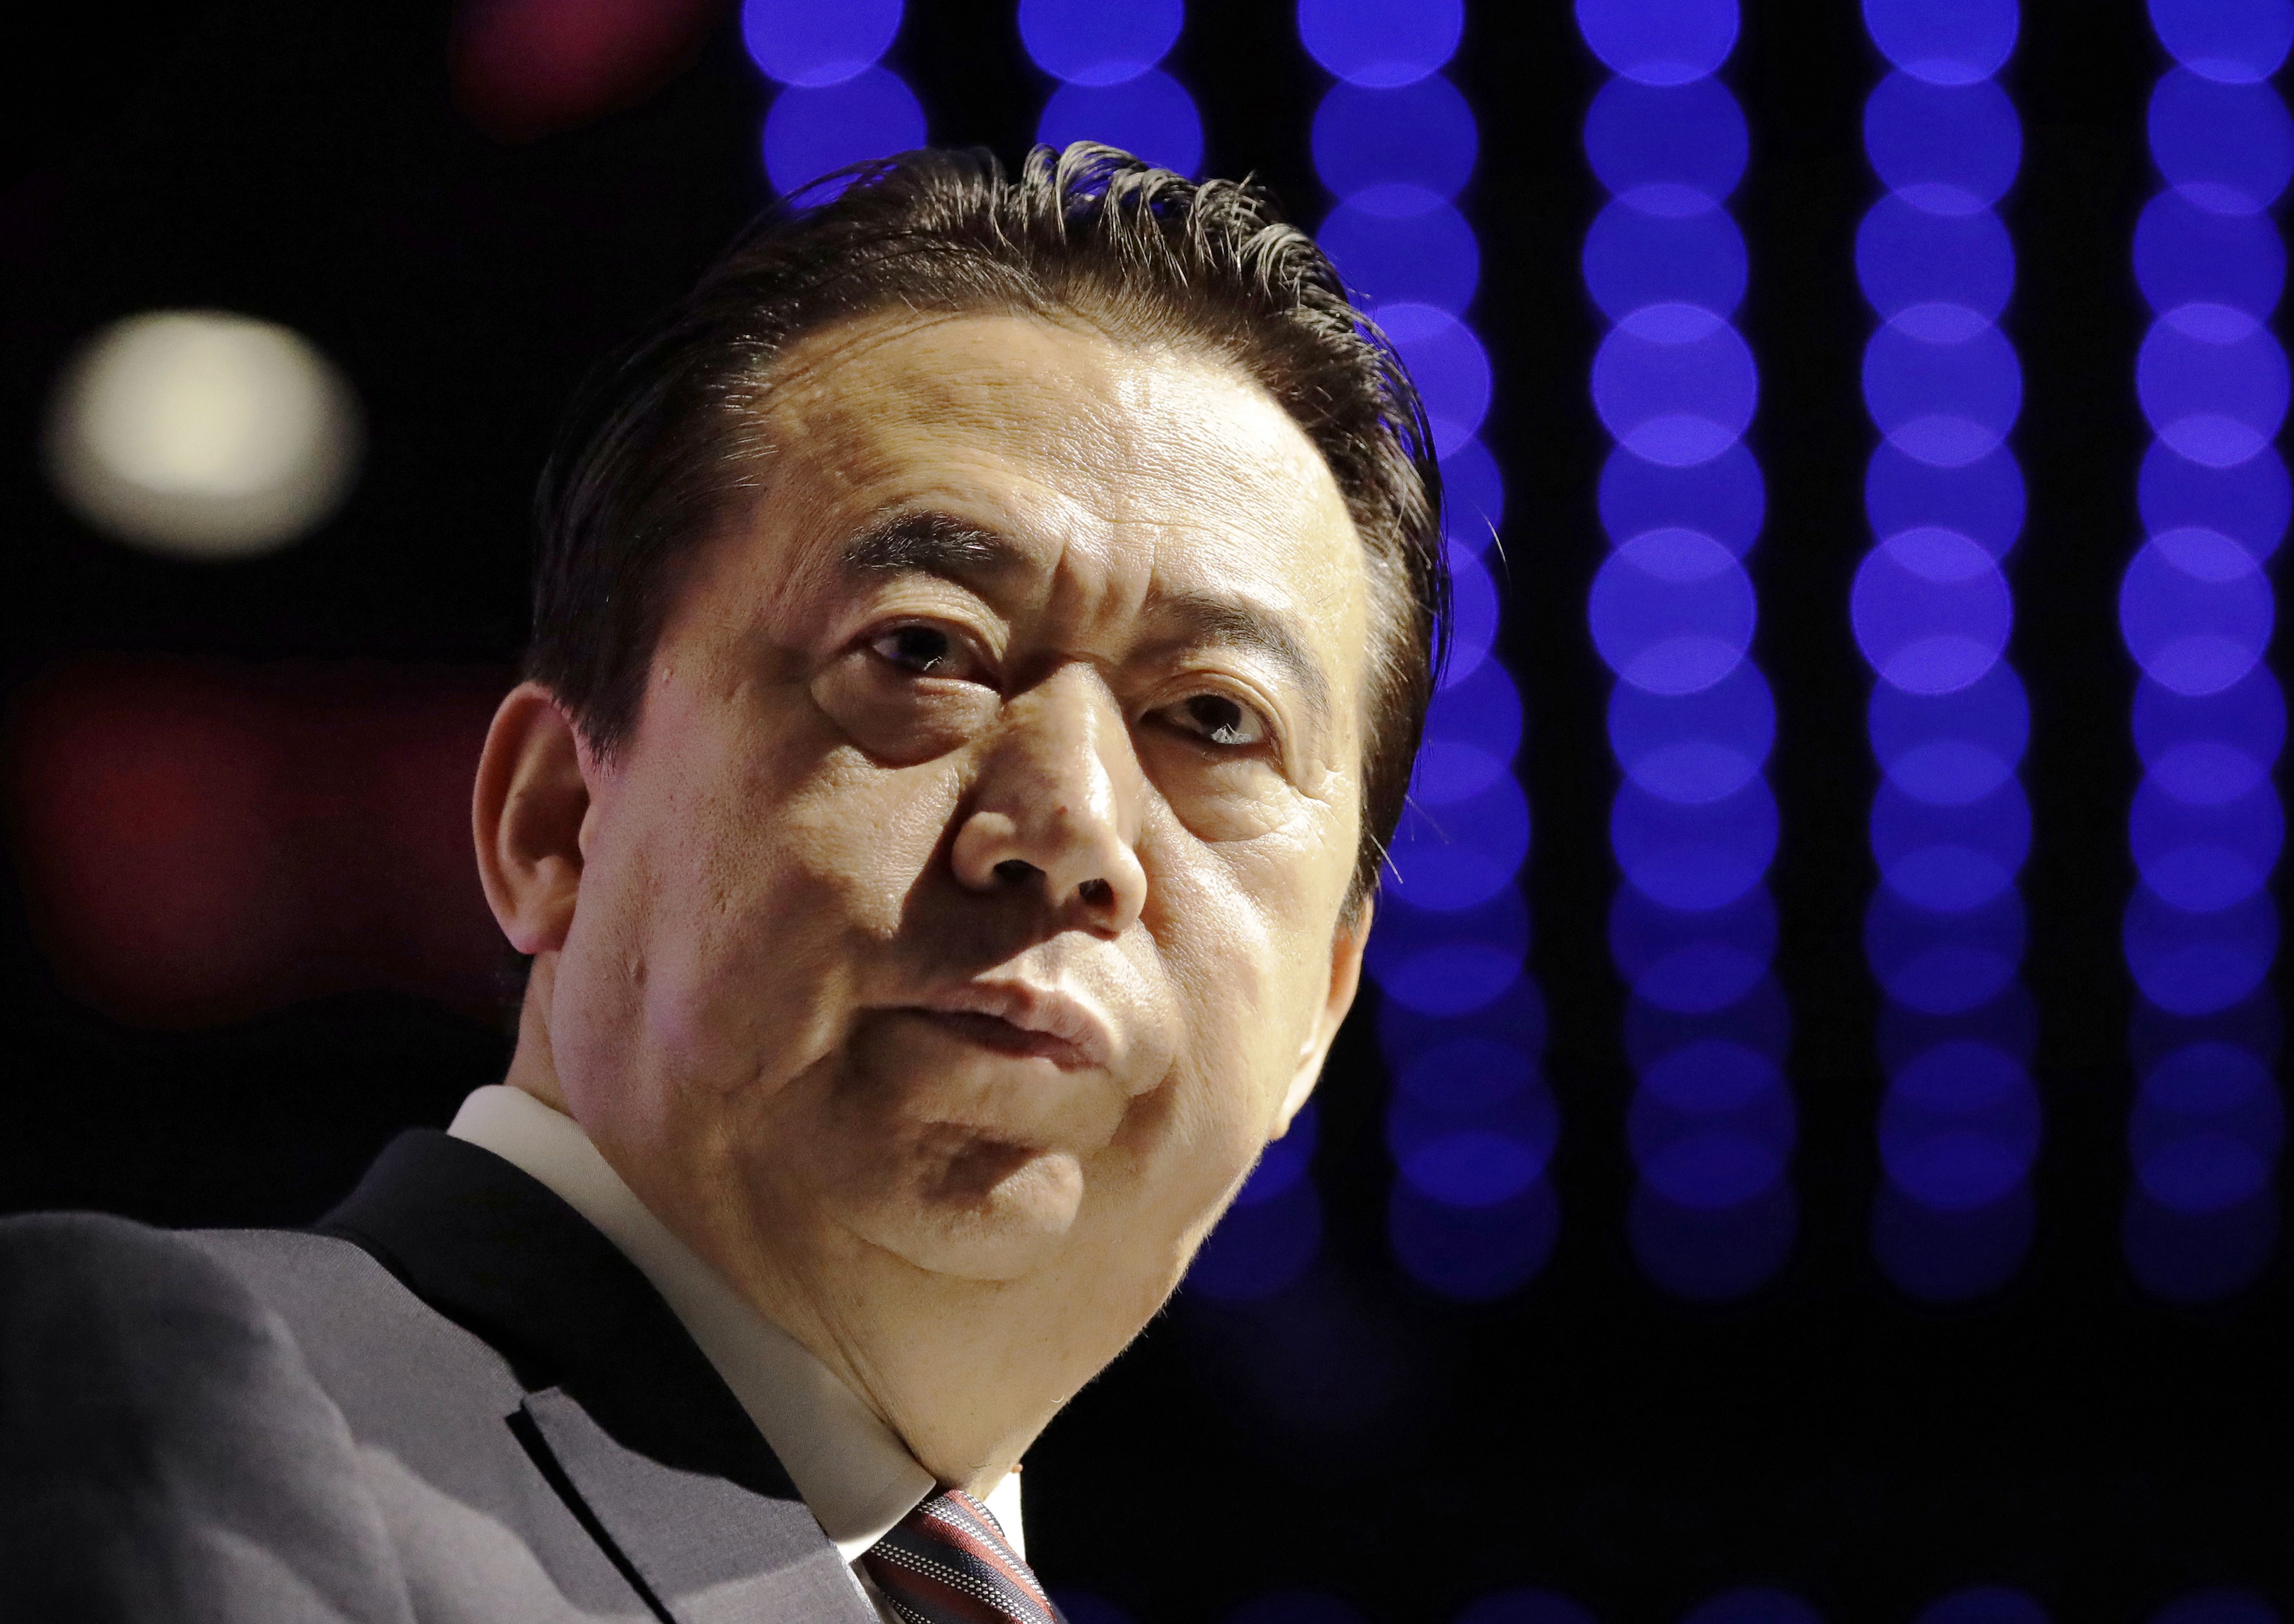 Interpol President Meng Hongwei delivers his opening address at the Interpol World congress, in Singapore. Photo: AP Photo